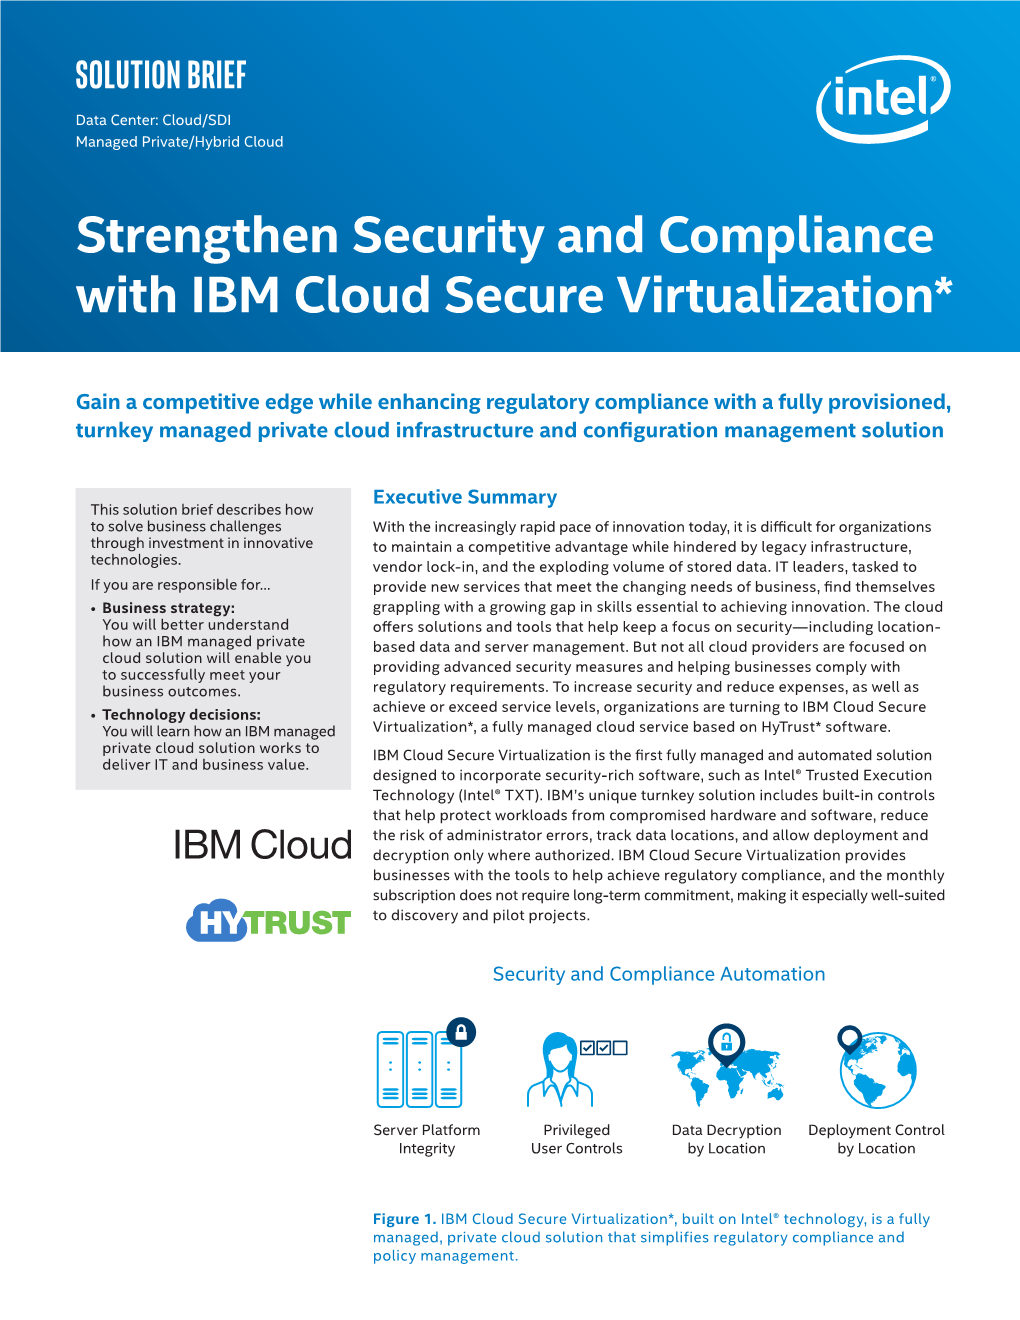 Strengthen Security and Compliance with IBM Cloud Secure Virtualization*